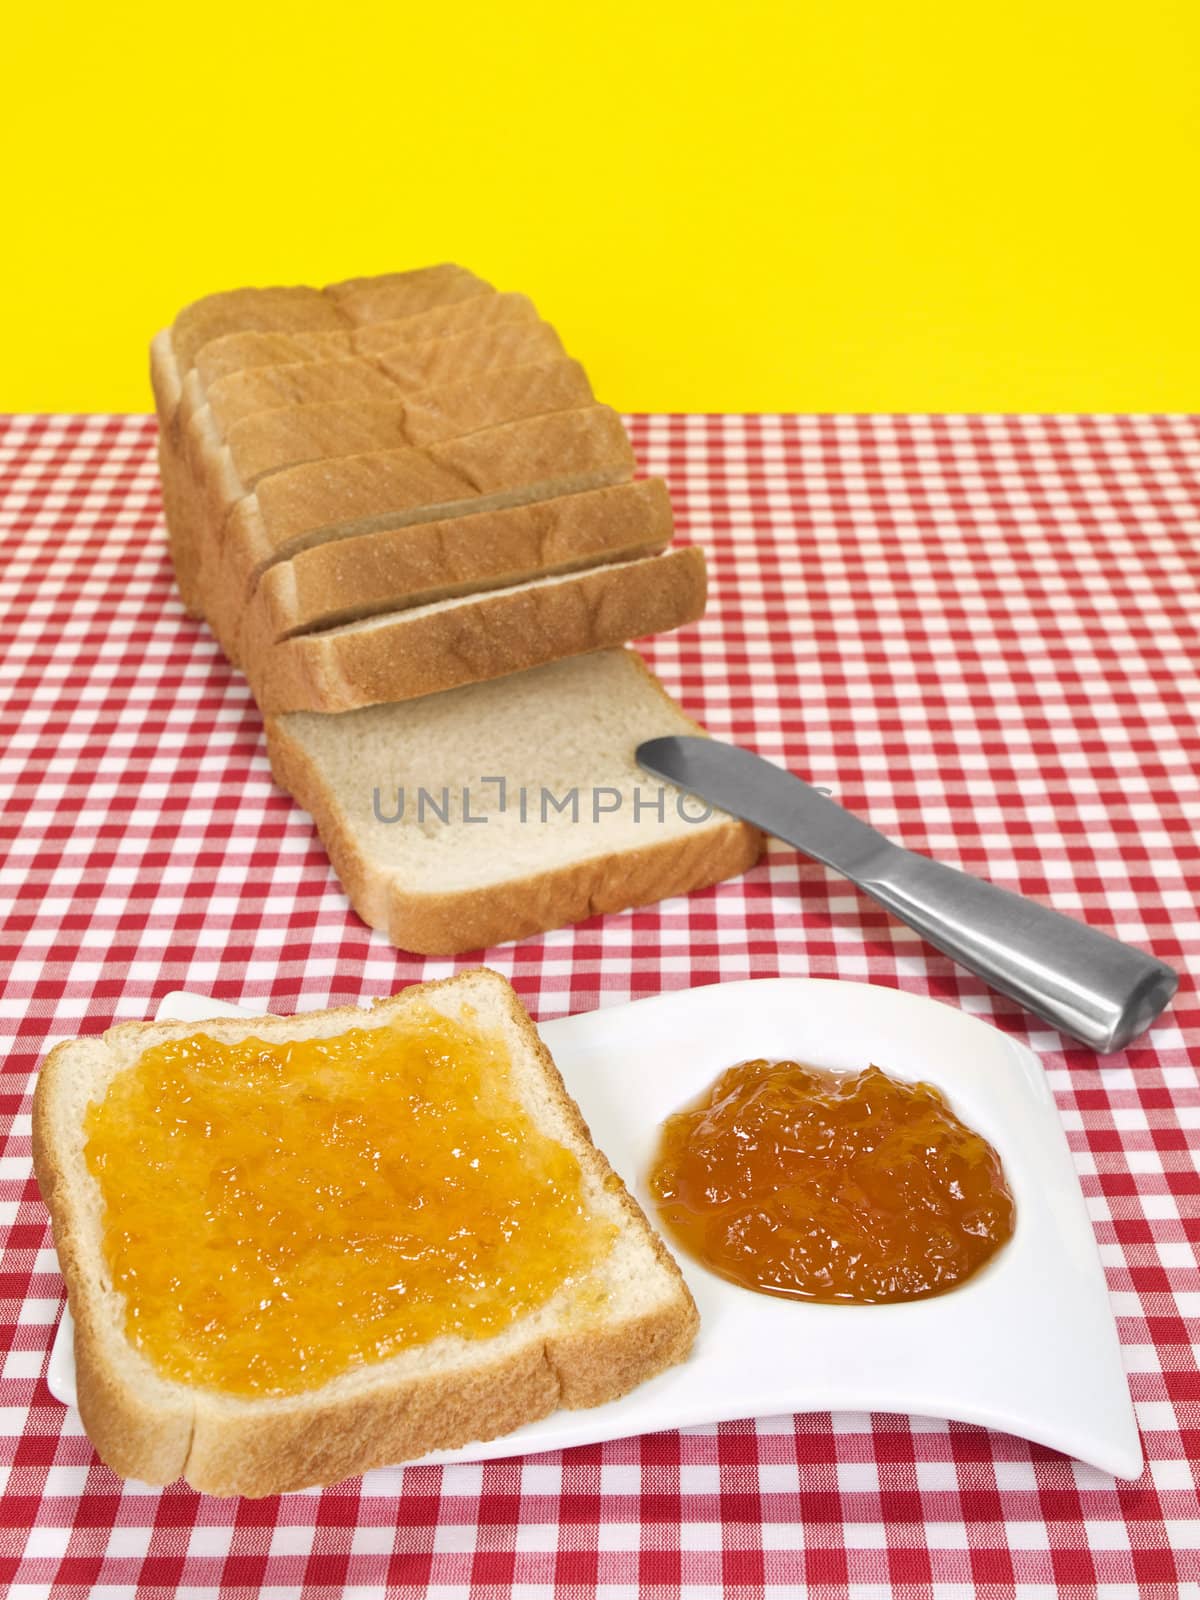 A slice of bread spread with jam beside a loaf of sliced bread.